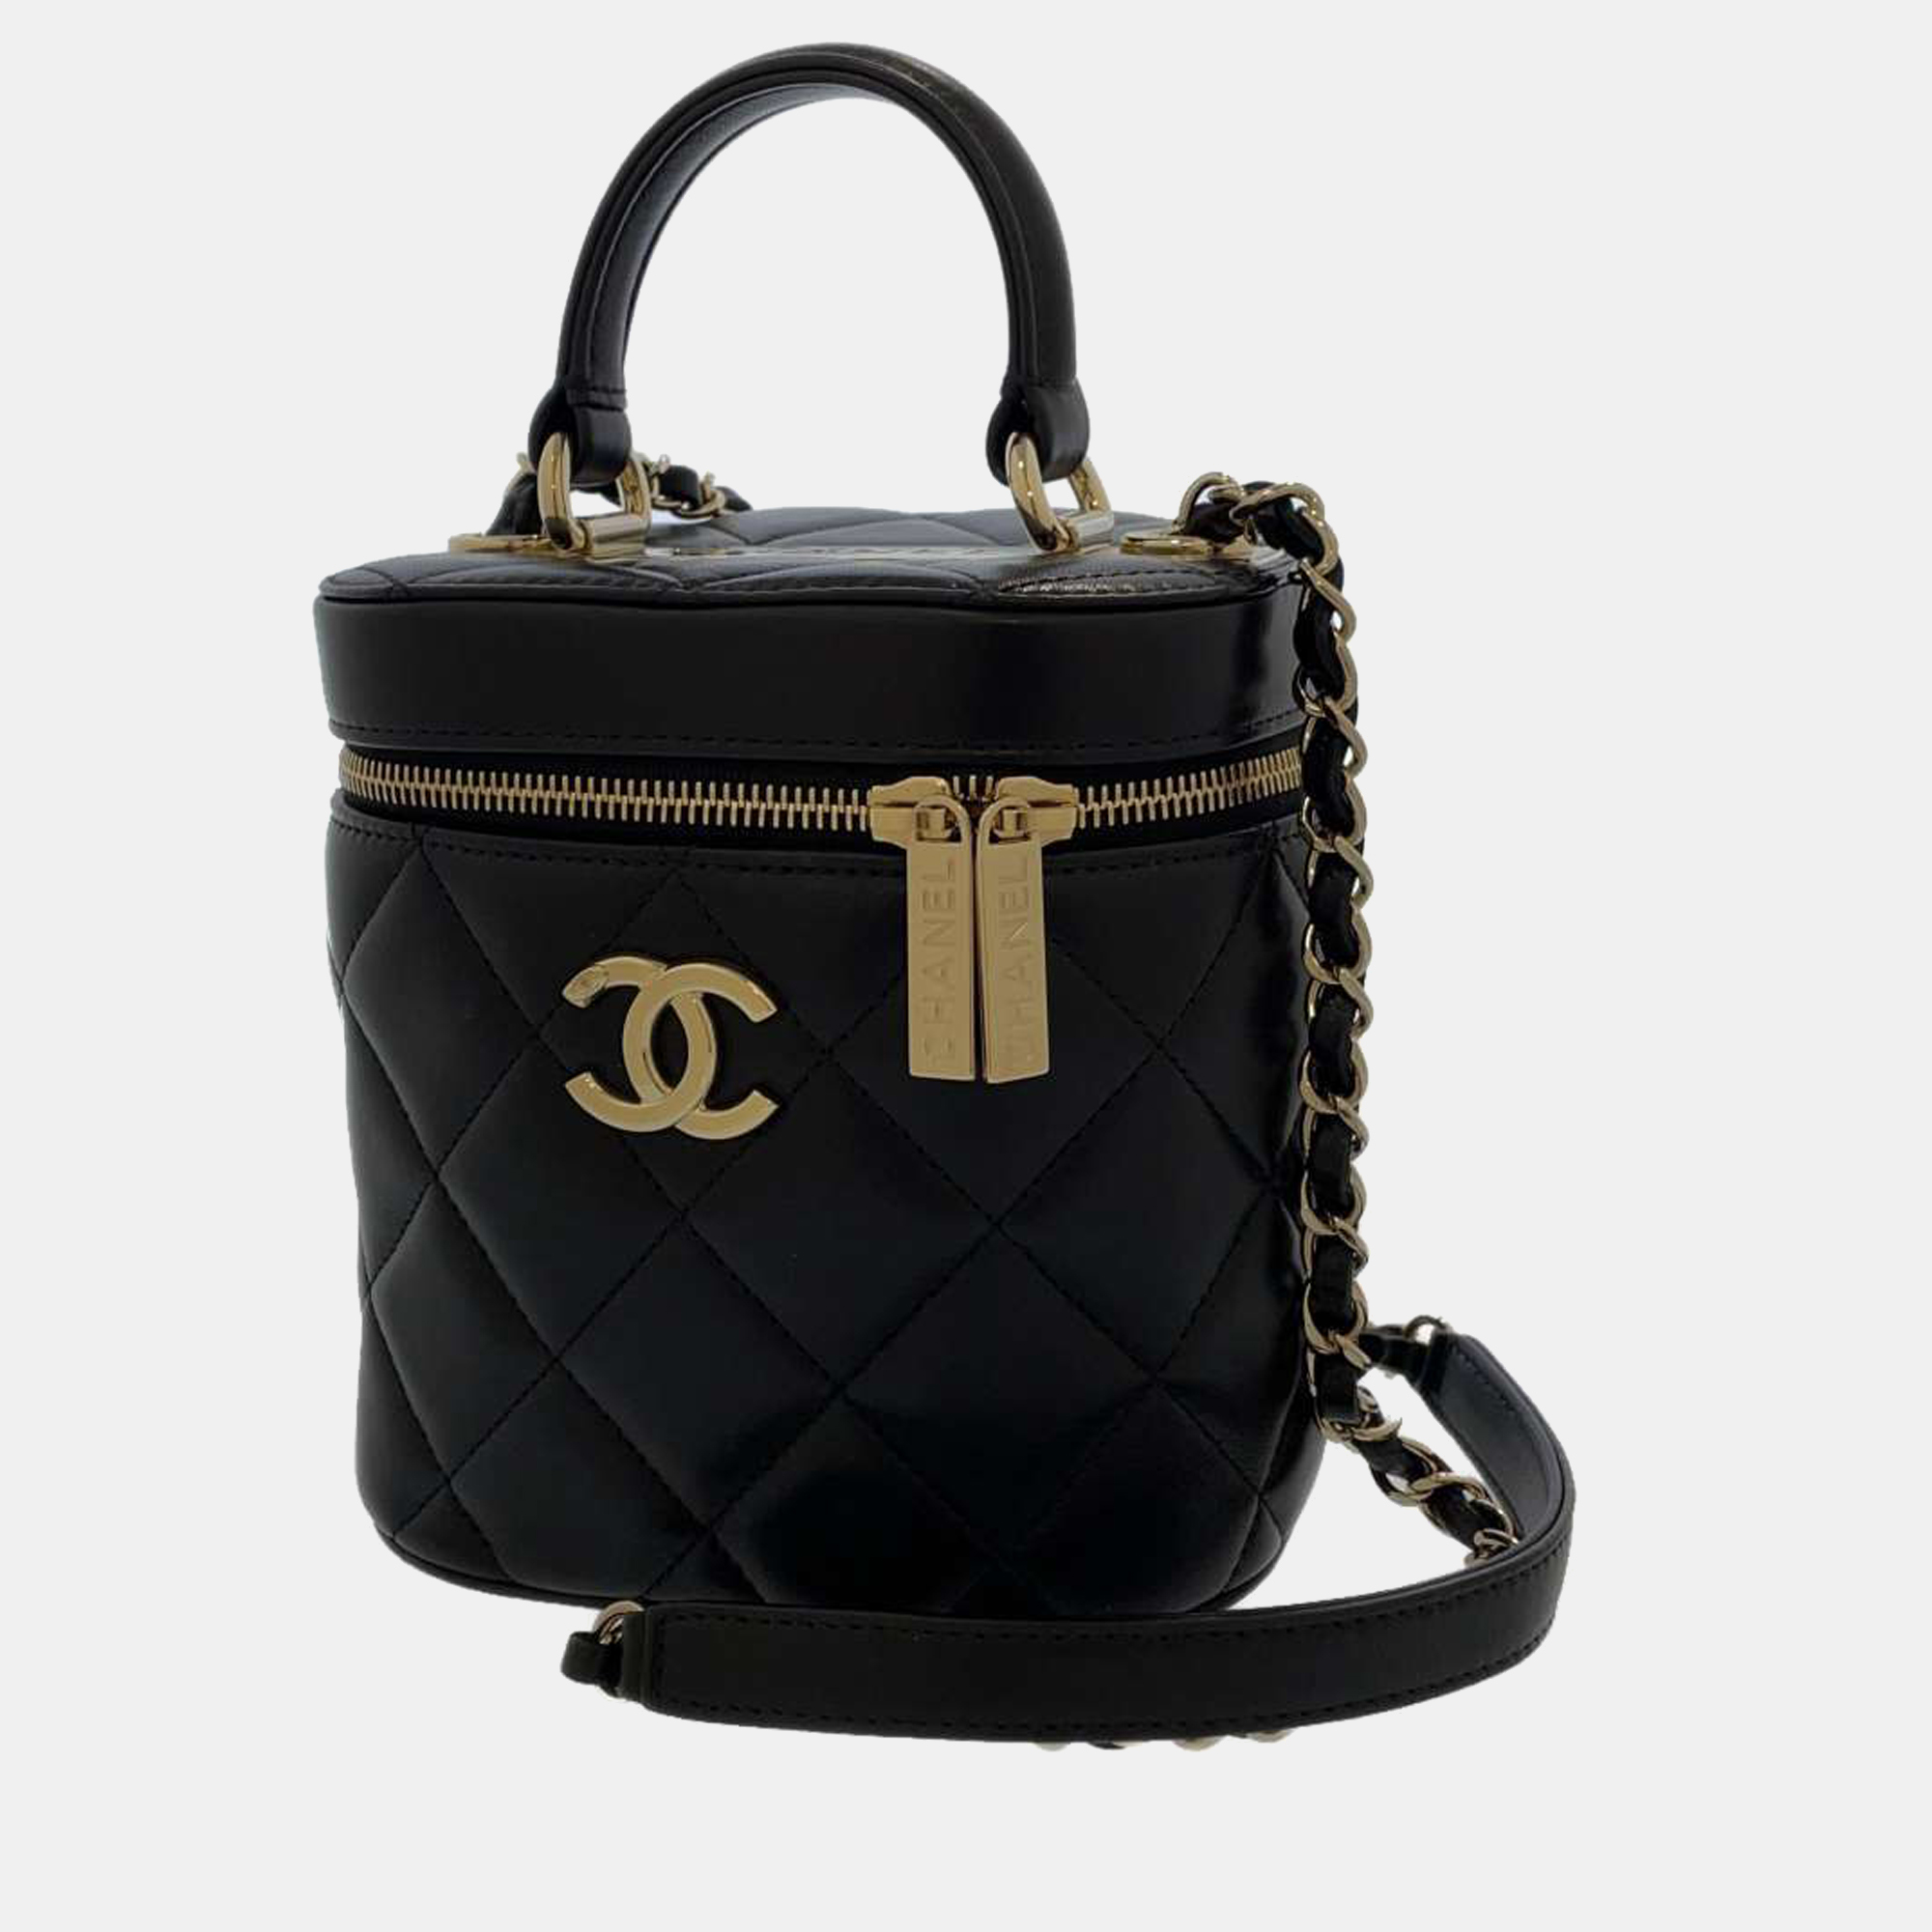 Pre-owned Chanel Black Leather Cc Vanity Case